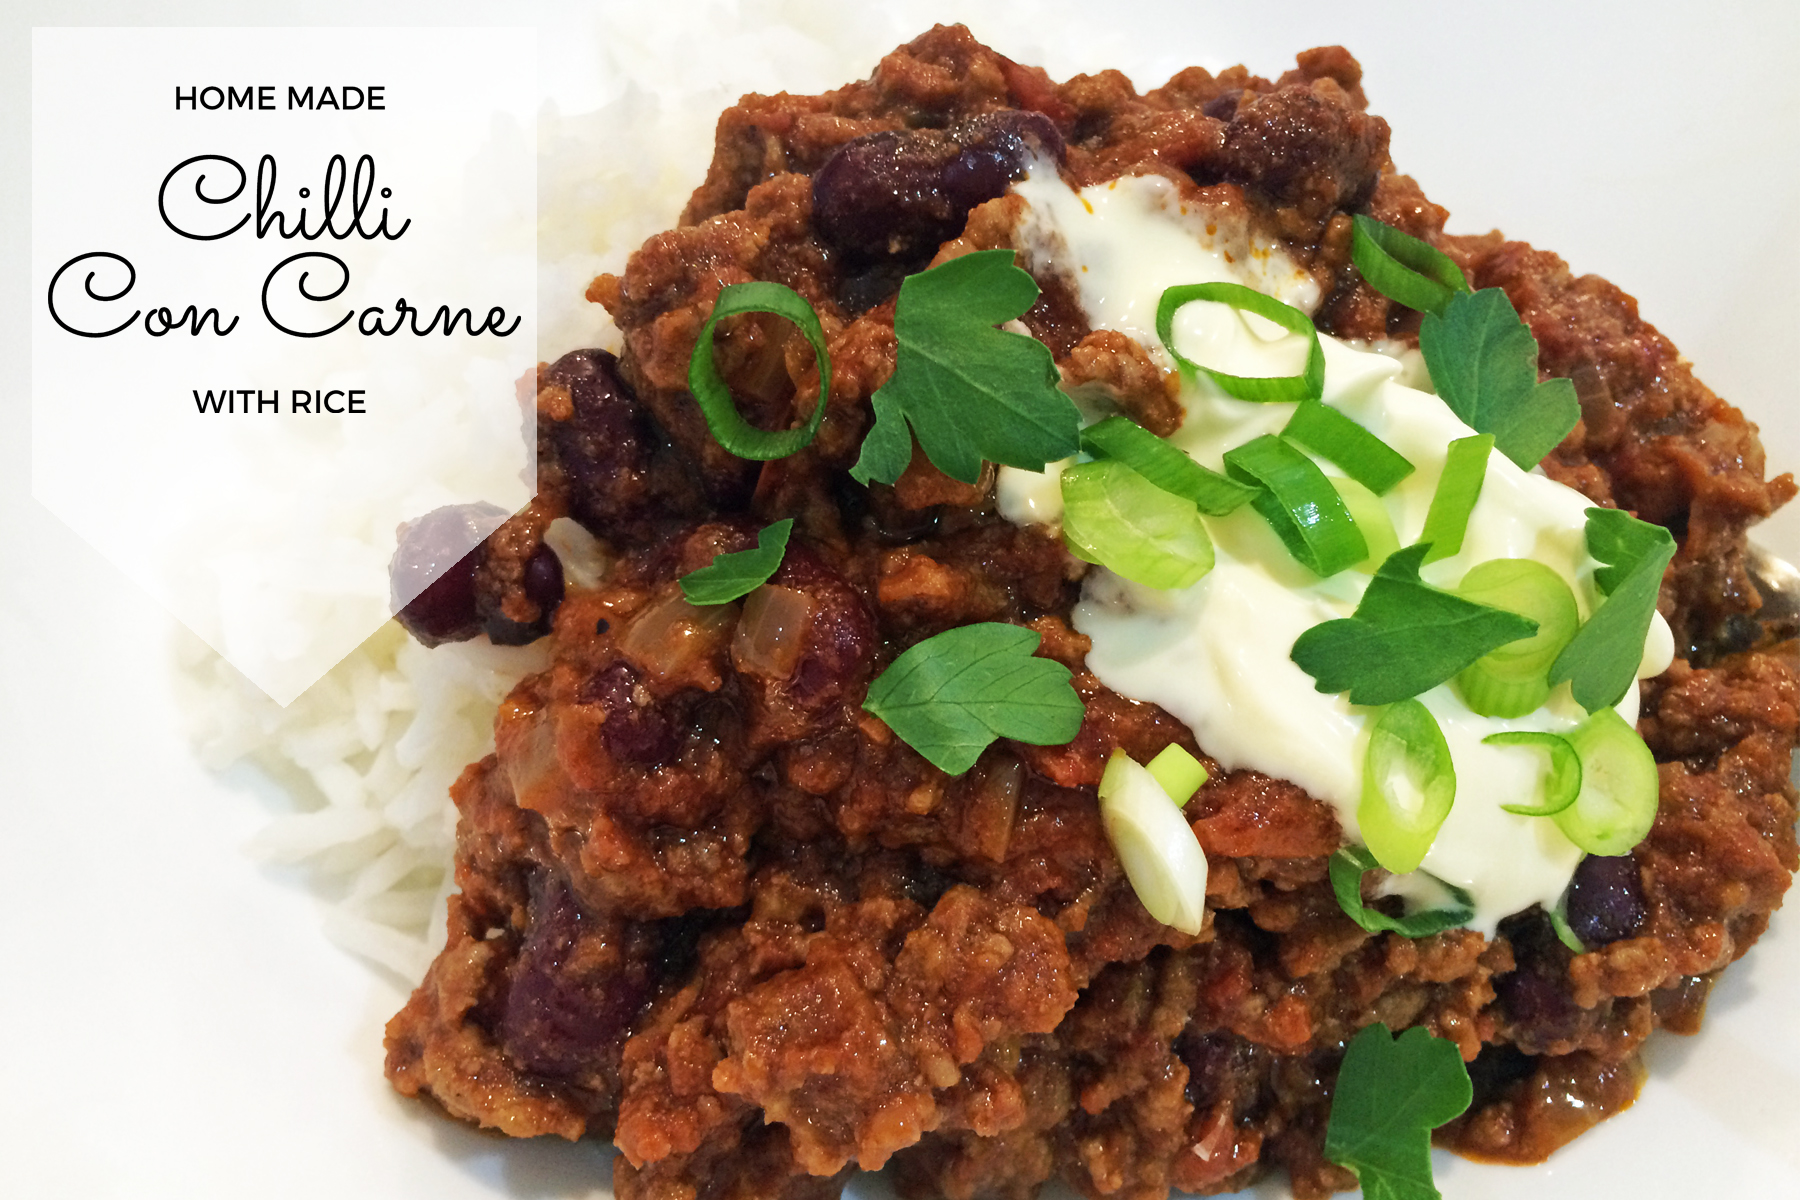 Home Made Chilli Con Carne Recipe - Mumslounge